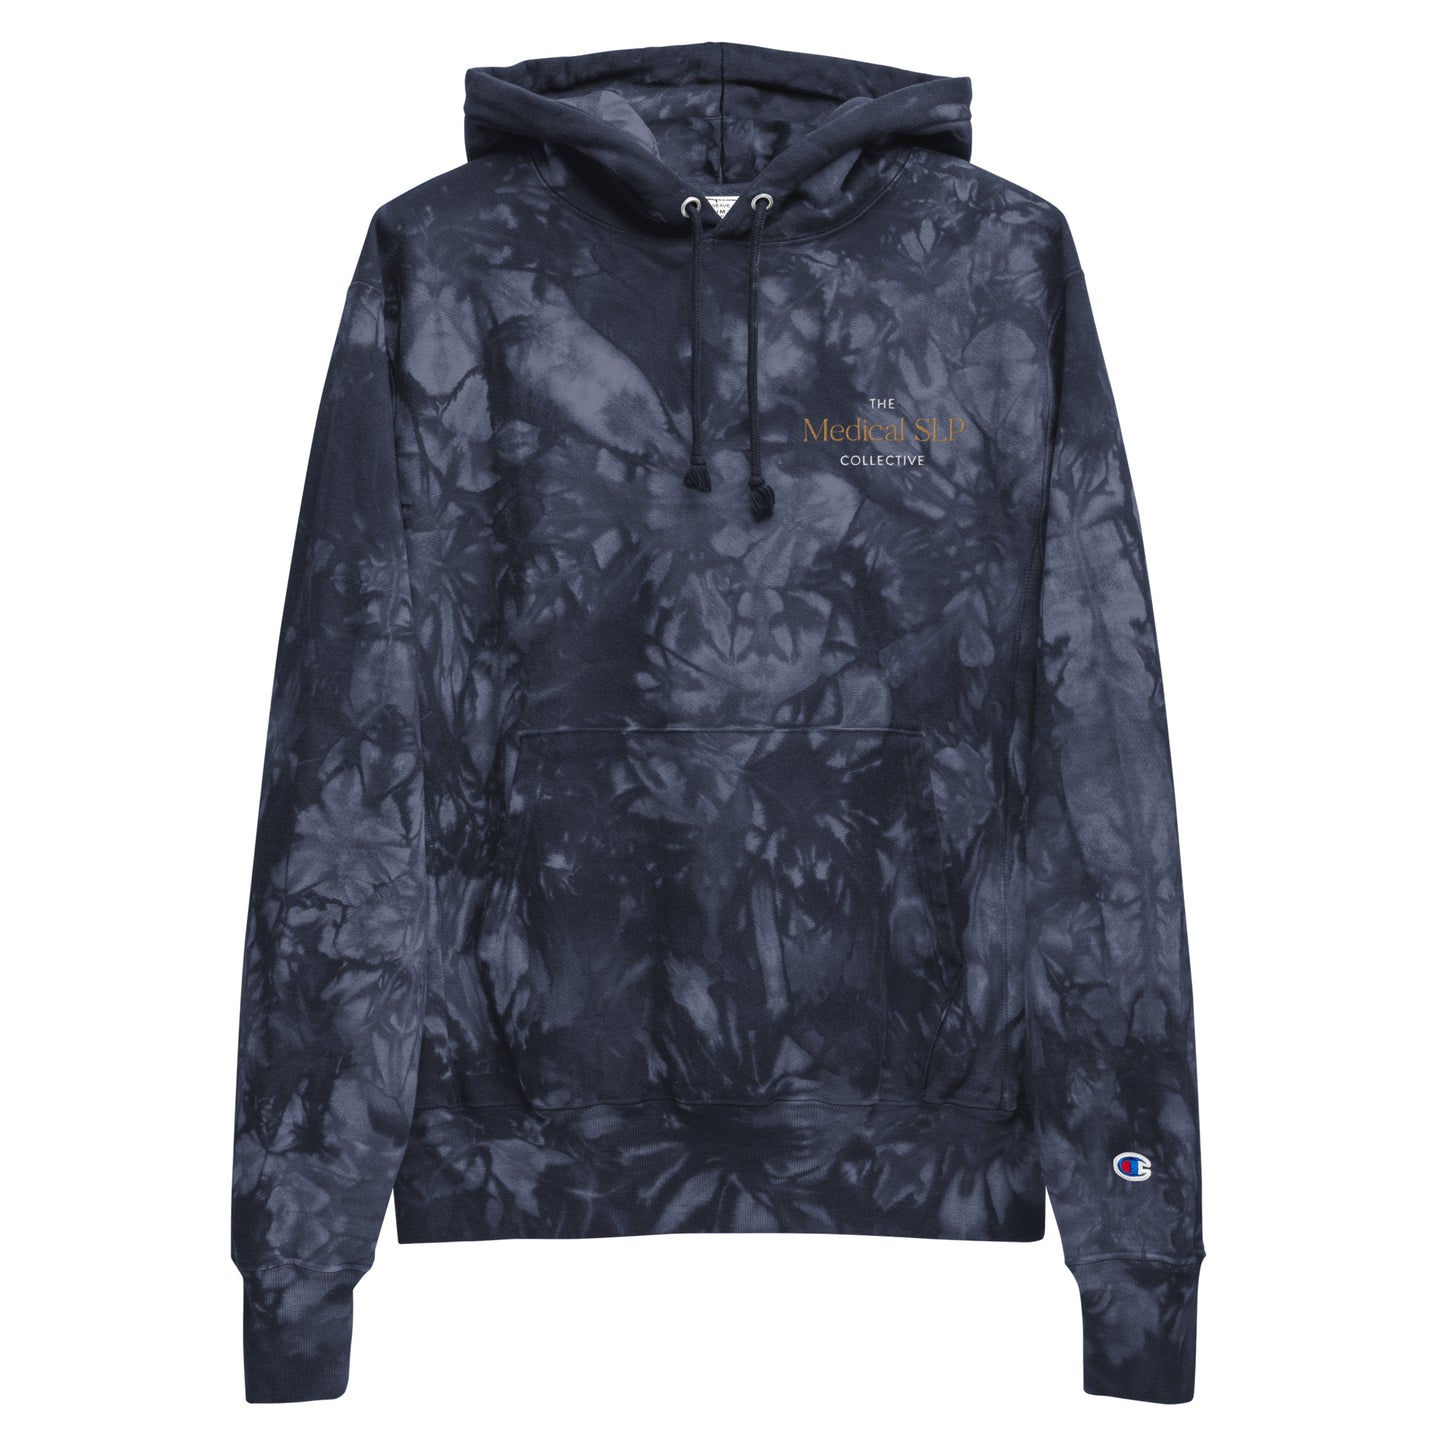 The Collective Unisex Champion tie-dye hoodie